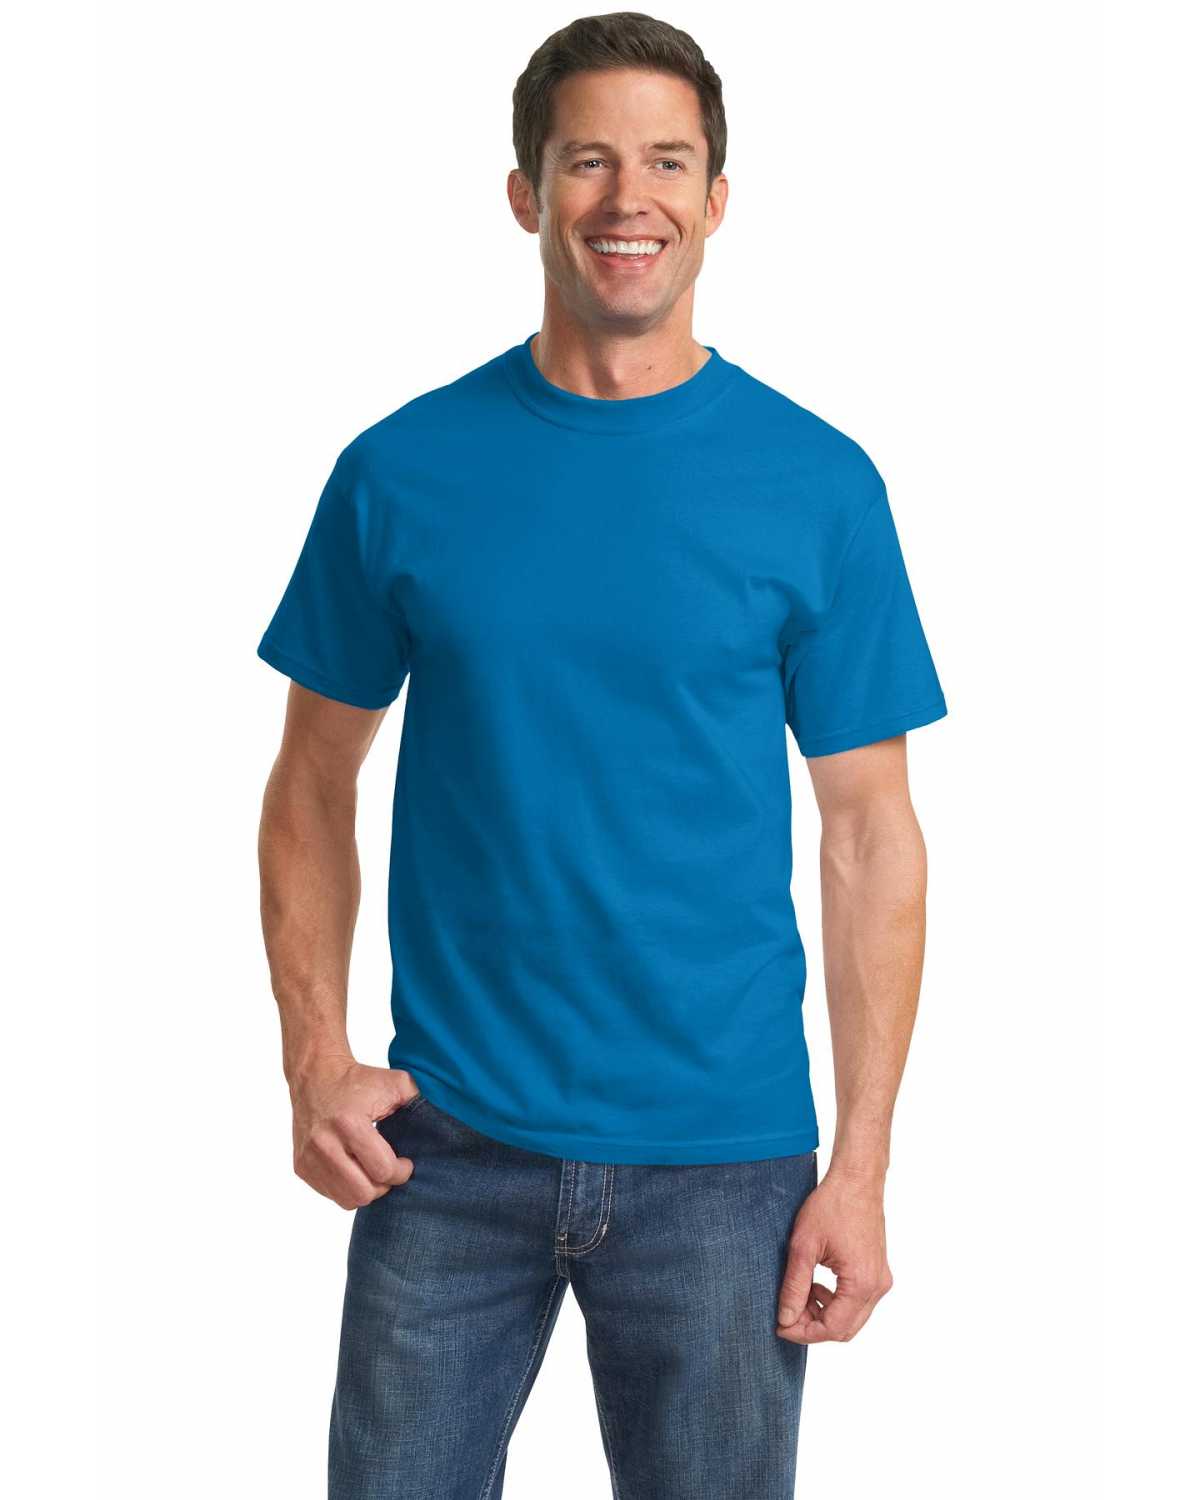 Port & Company PC61T Tall Essential Tee on discount | ApparelChoice.com